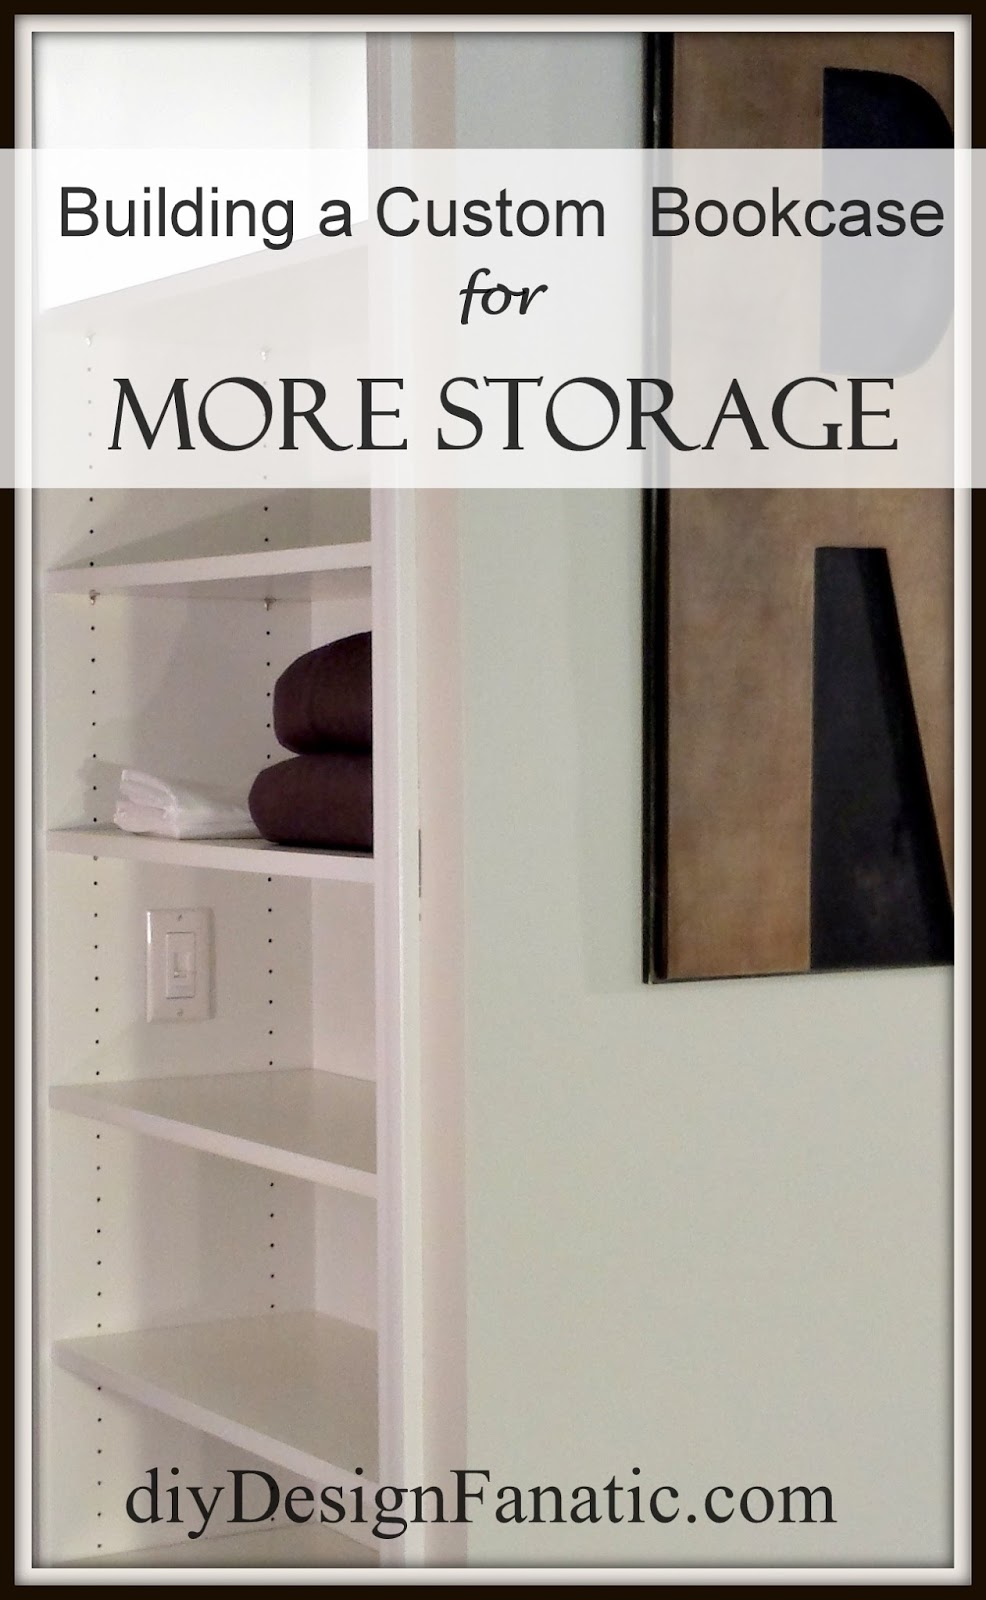 Mountain cottage, mountain cottage bedroom, Storage, Storage Shelves, bookcases, built in bookcase,cottage, cottage style, farmhouse, farmhouse style, diyDesignFanatic.com